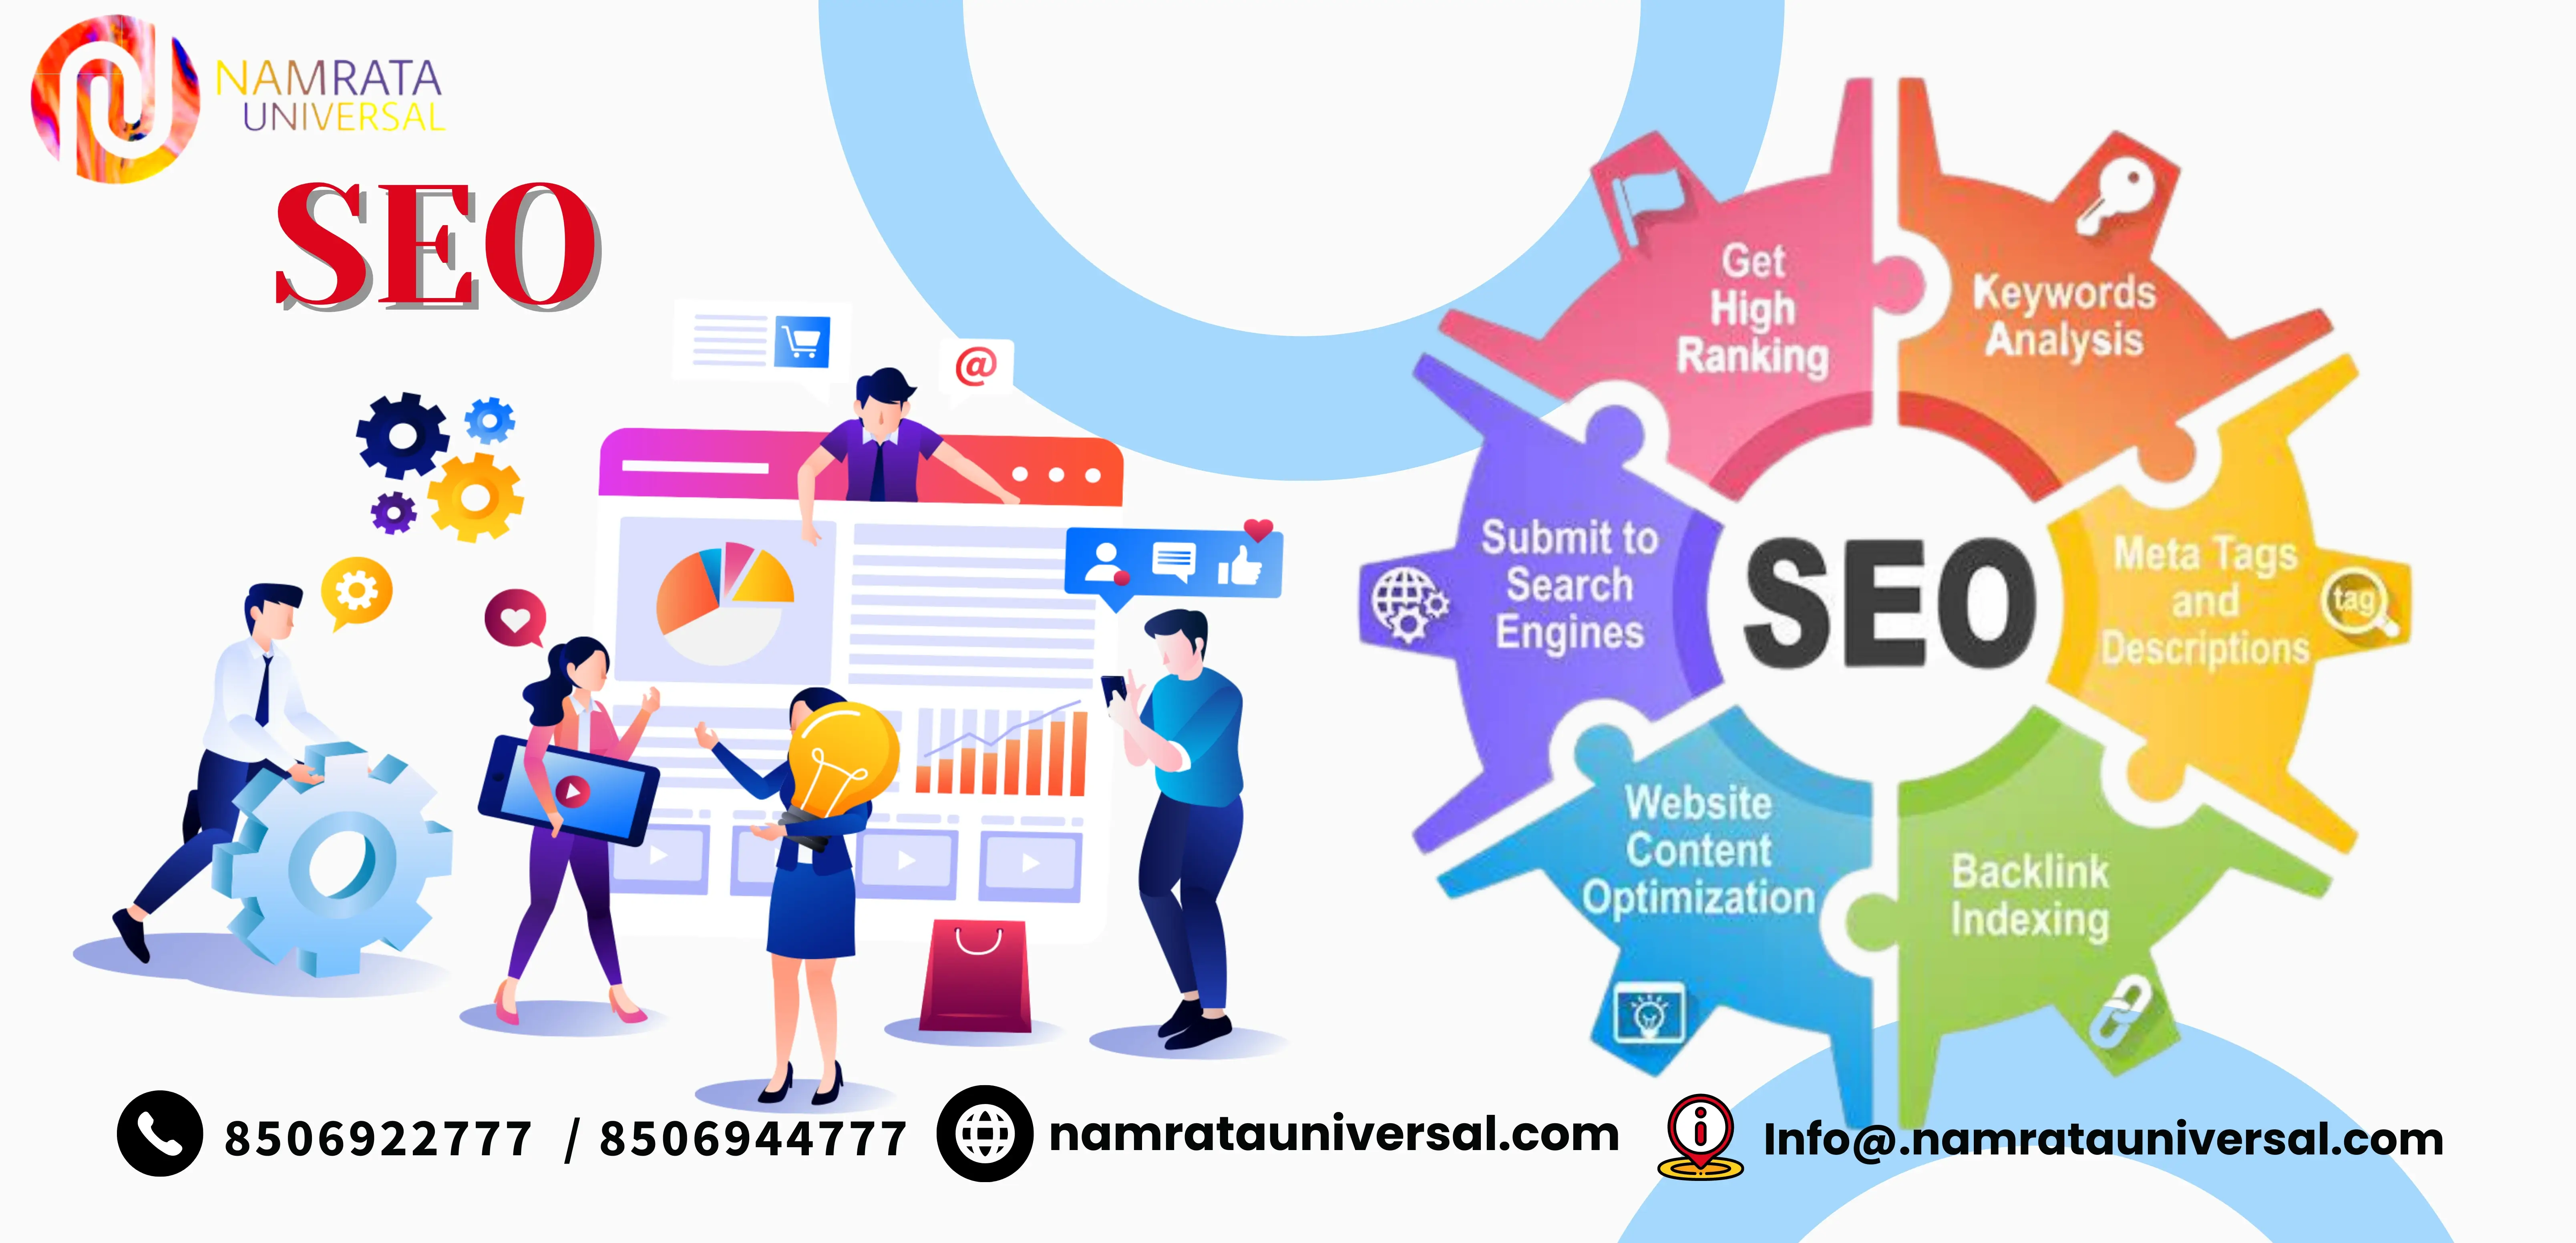 The Best SEO Company for Your Business